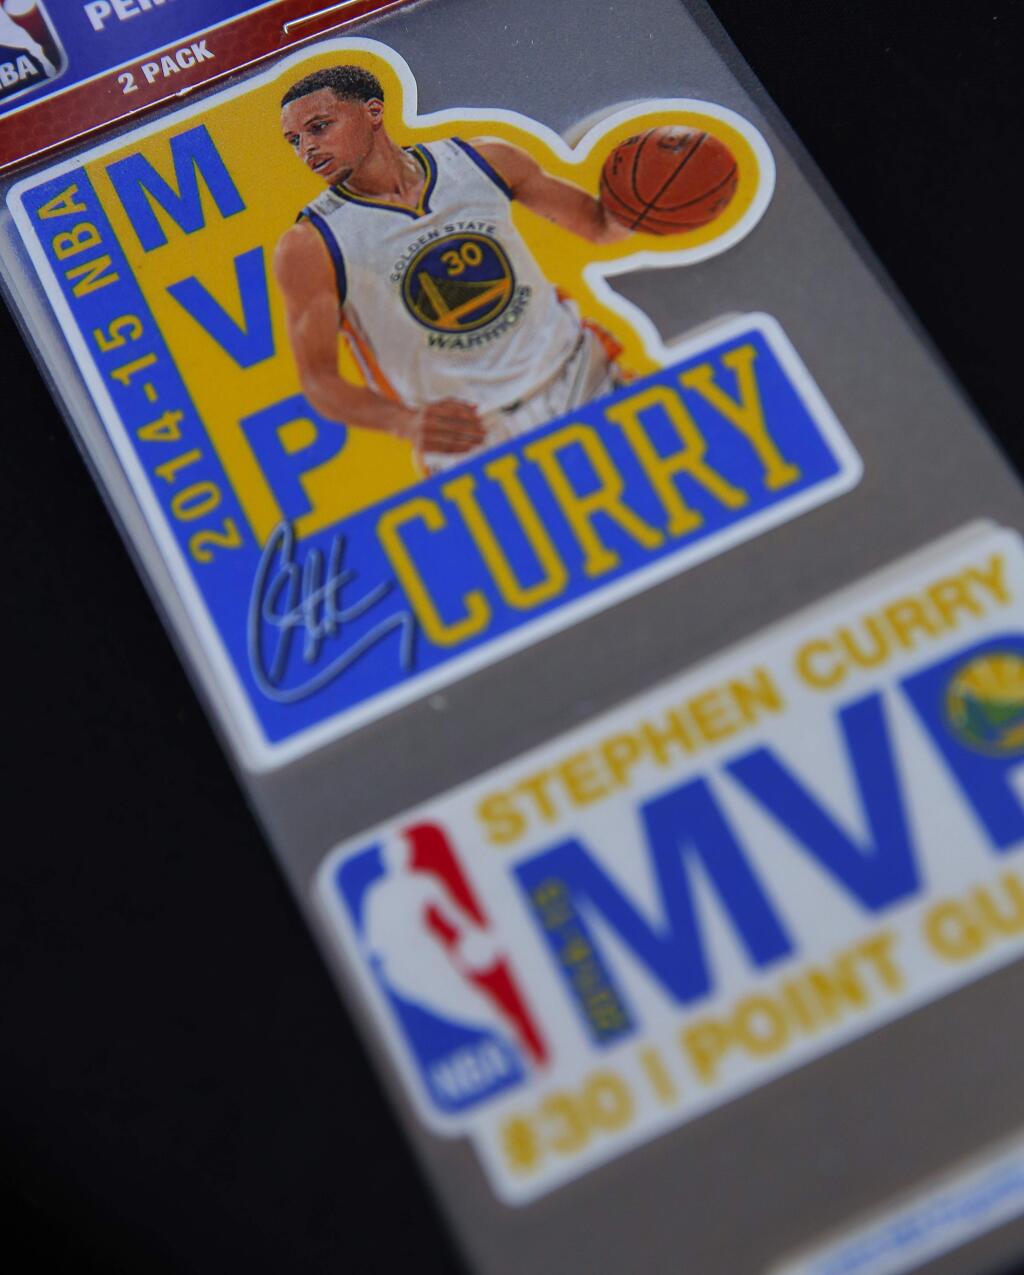 An MVP Stephen Curry sticker from last season for sale at a roadside vendor in Rohnert Park, on Tuesday, May 10, 2016. (Christopher Chung/ The Press Democrat)